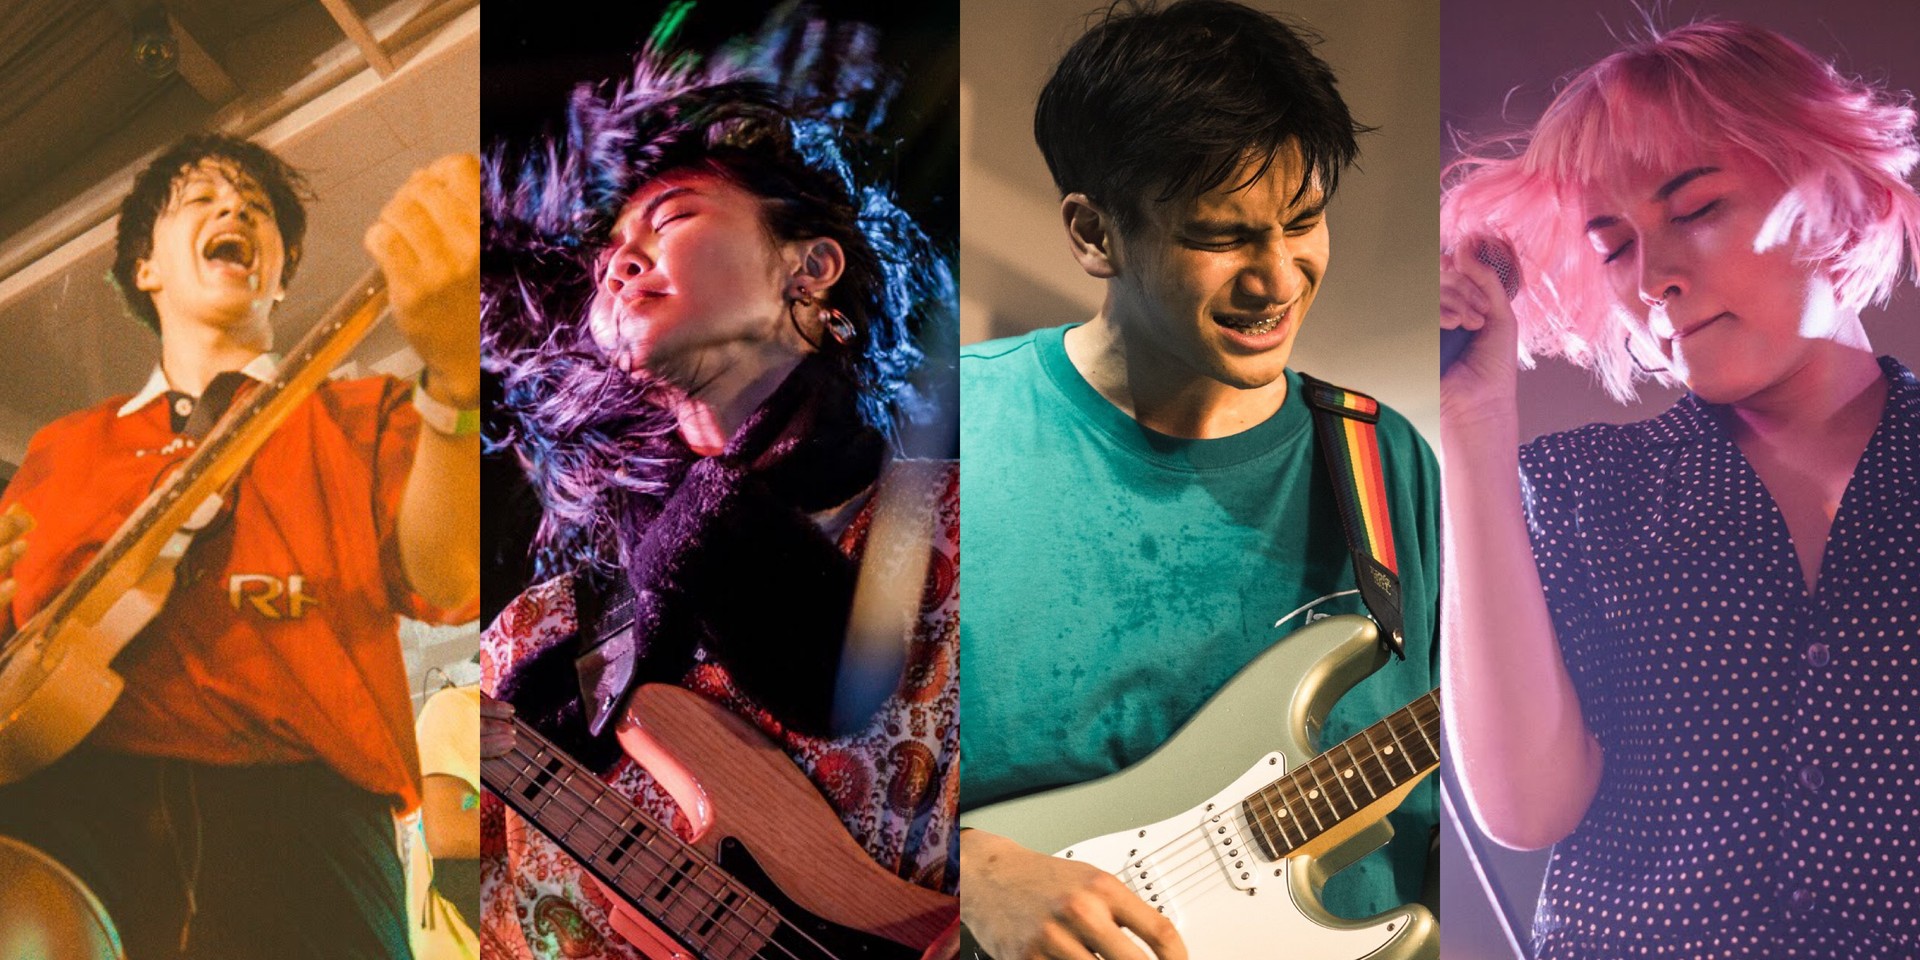 All of the Noise 2018 brings holidays early to music fans with Boy Pablo, Phum Viphurit, Elephant Gym, Sobs, and more – photo gallery